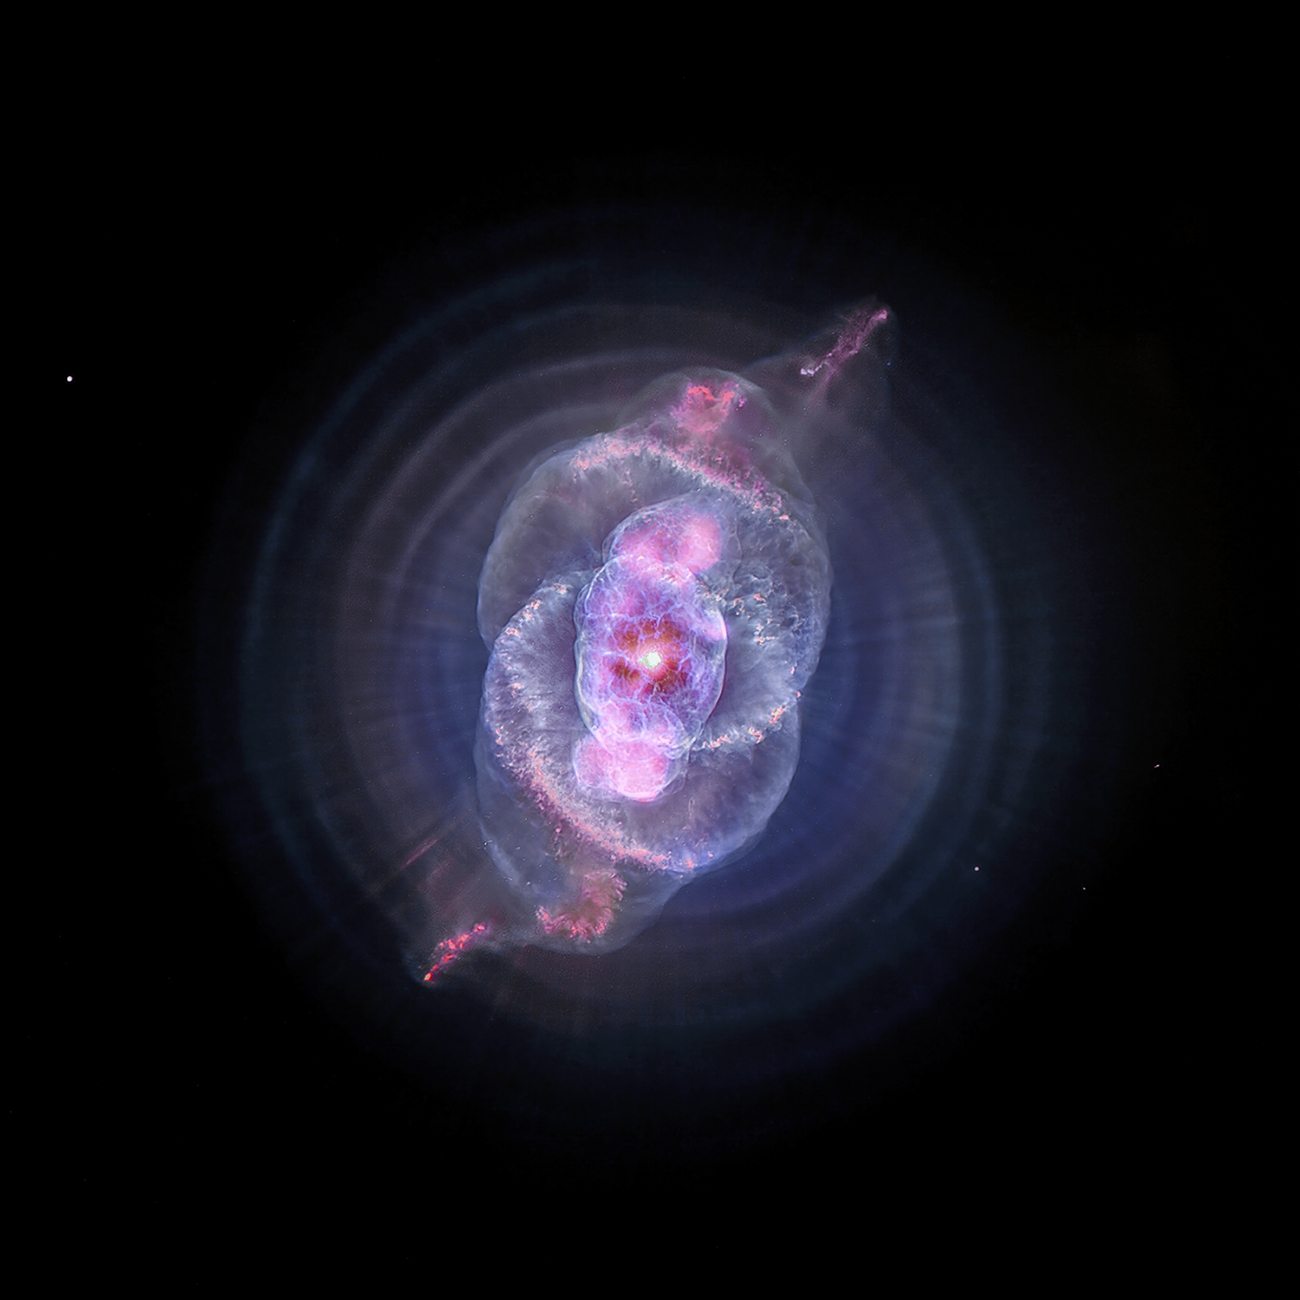 Eventually, our Sun will run out of fuel and die (though not for another 5 billion years). As it does, it will become like the object seen here, the Cat’s Eye Nebula, which is a planetary nebula. A fast wind from the remaining stellar core rams into the ejected atmosphere and pushes it outward, creating wispy structures seen in X-rays by Chandra and optical light by the Hubble Space Telescope.